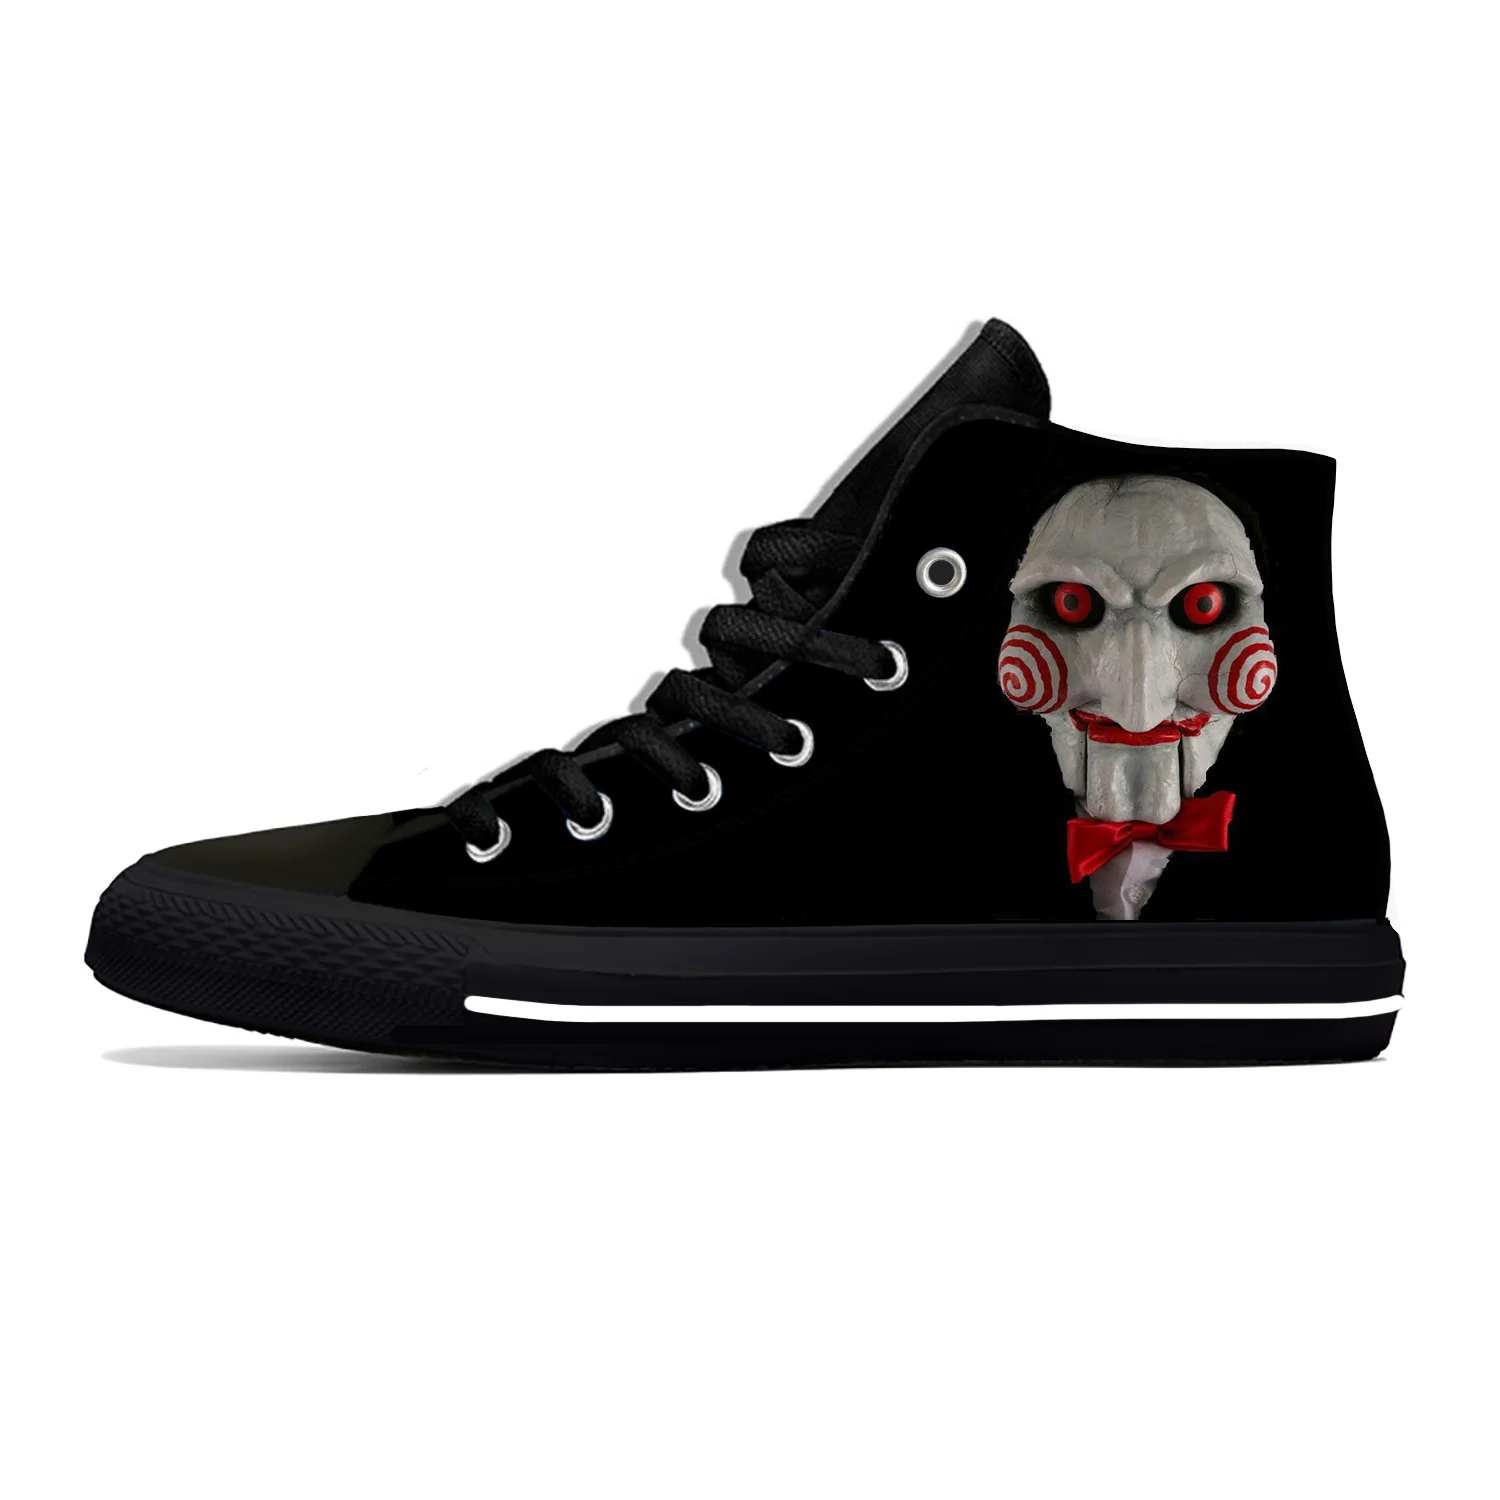 

Horror Scary Halloween Saw Billy Puppet Jigsaw Casual Cloth Shoes High Top Lightweight Breathable 3D Print Men Women Sneakers